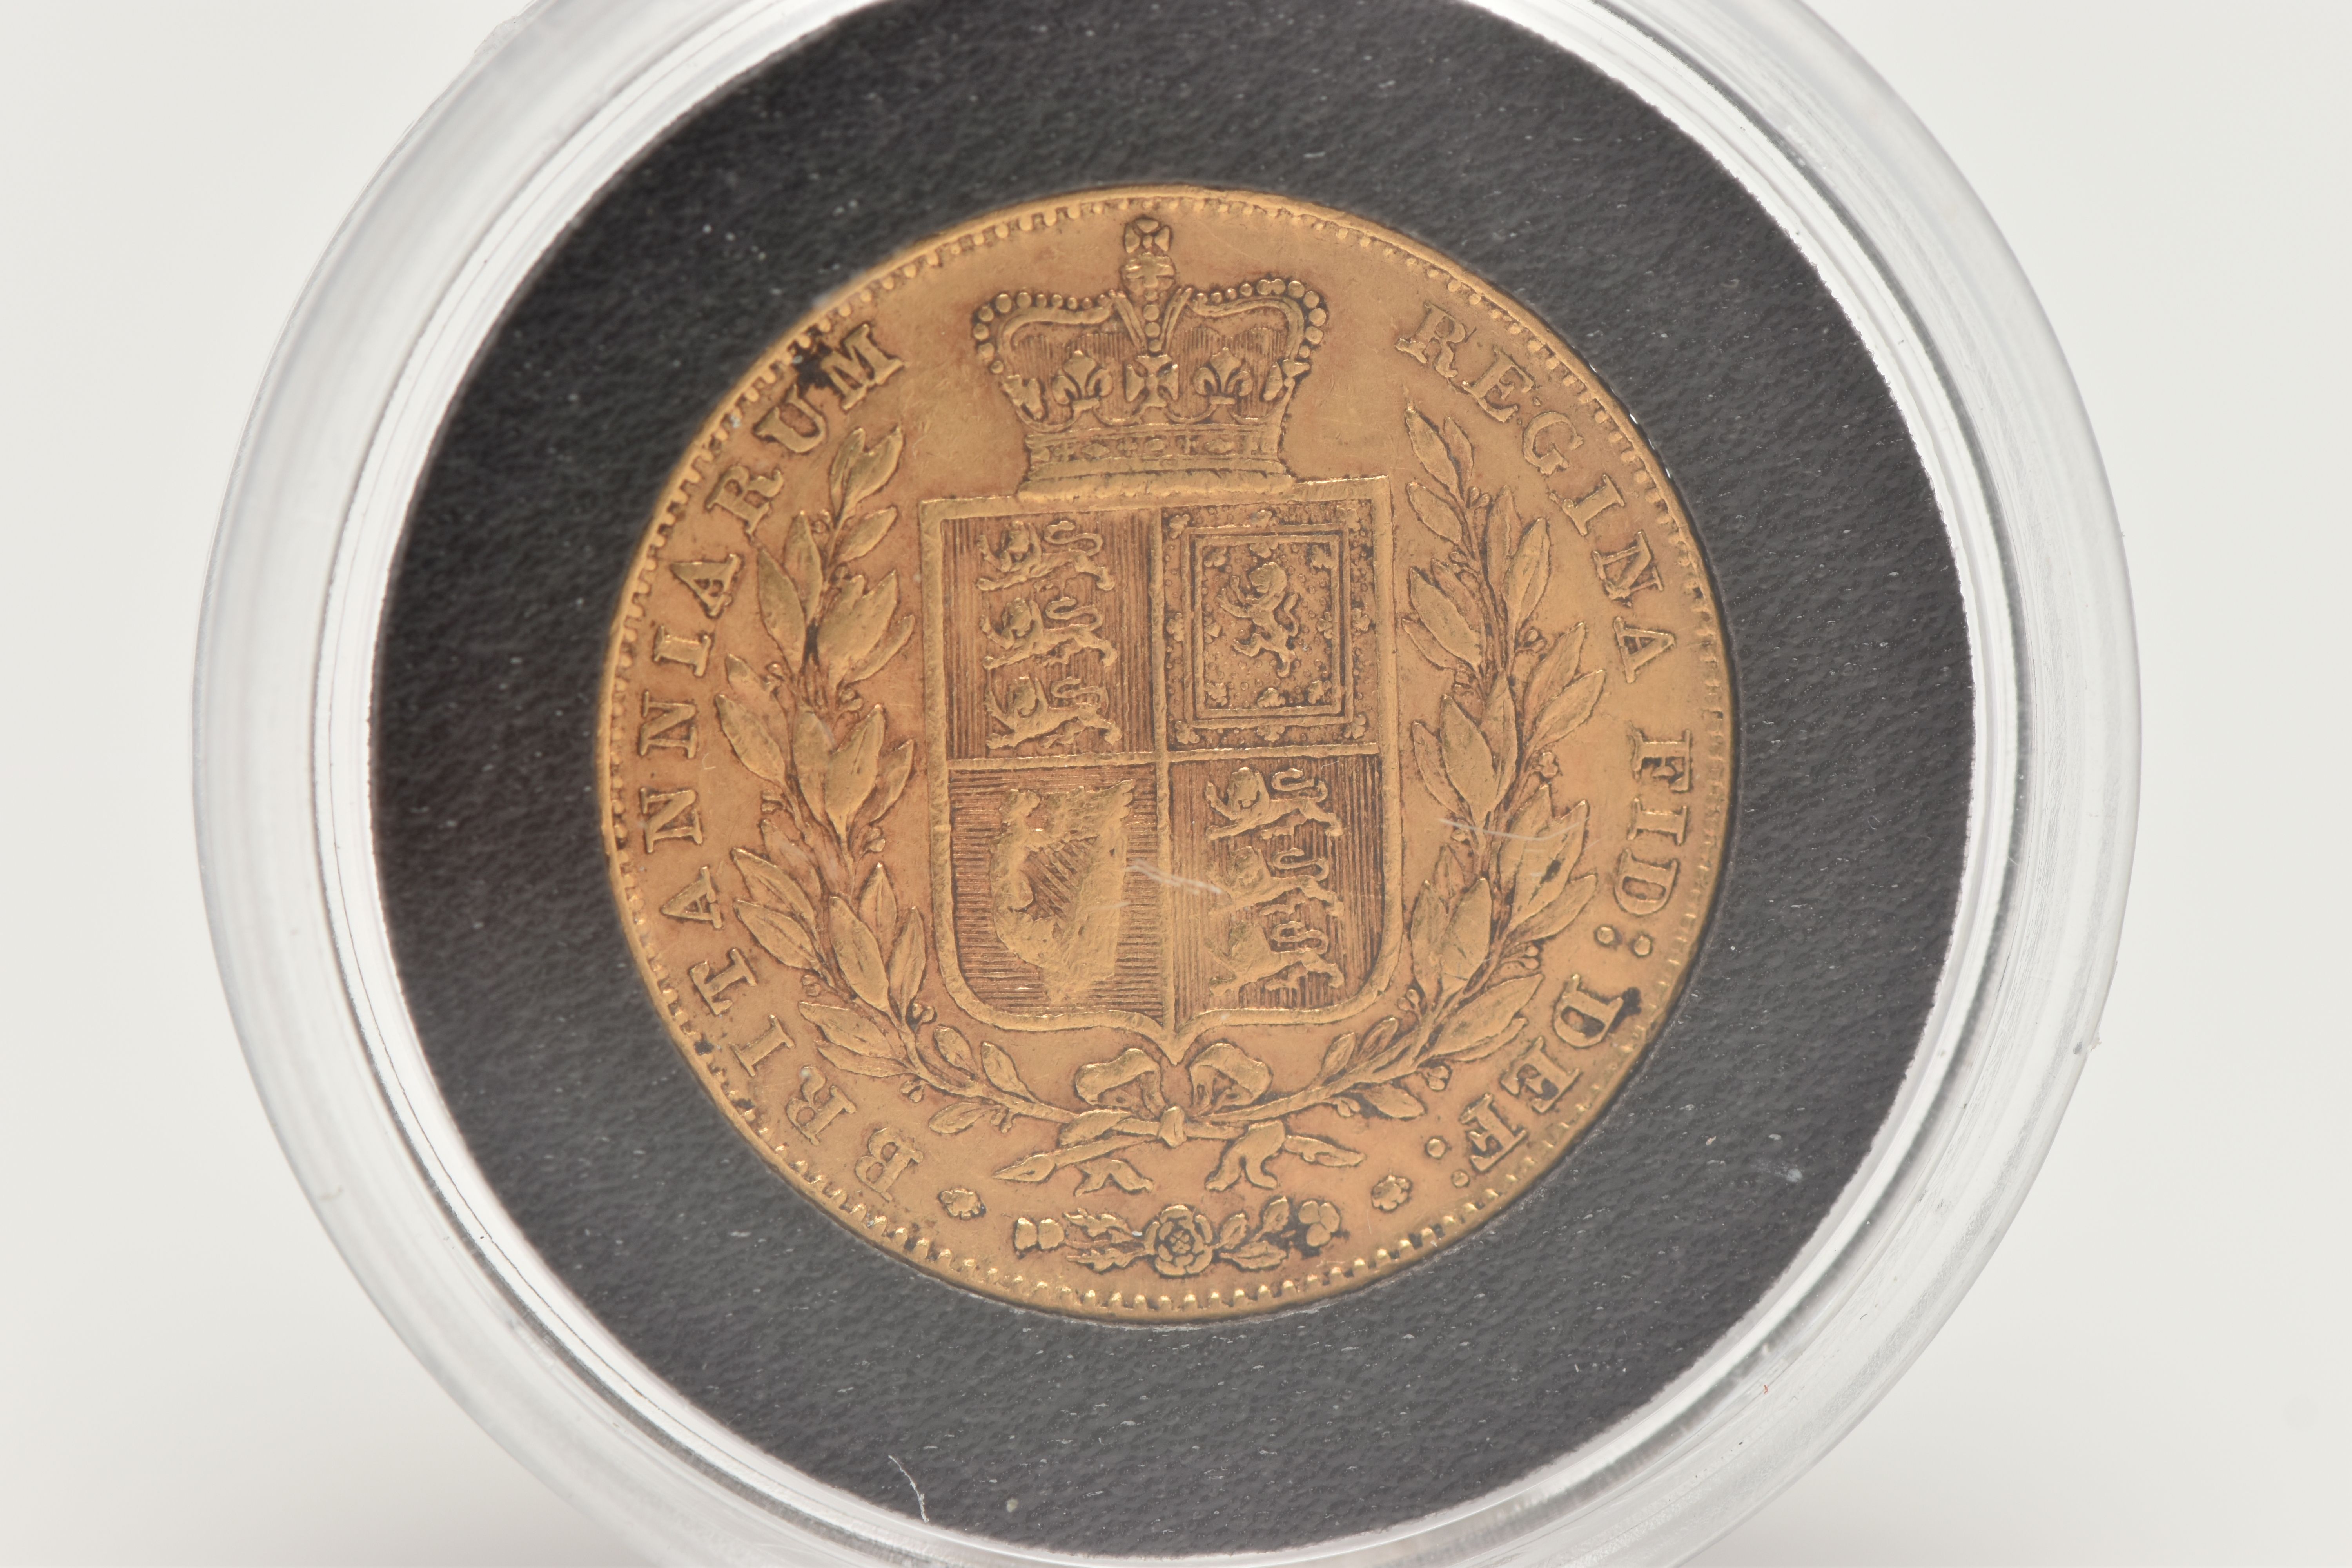 A VICTORIA SHEILD BACK FULL SOVEREIGN GOLD COIN, dated 1846, within a protective capsule